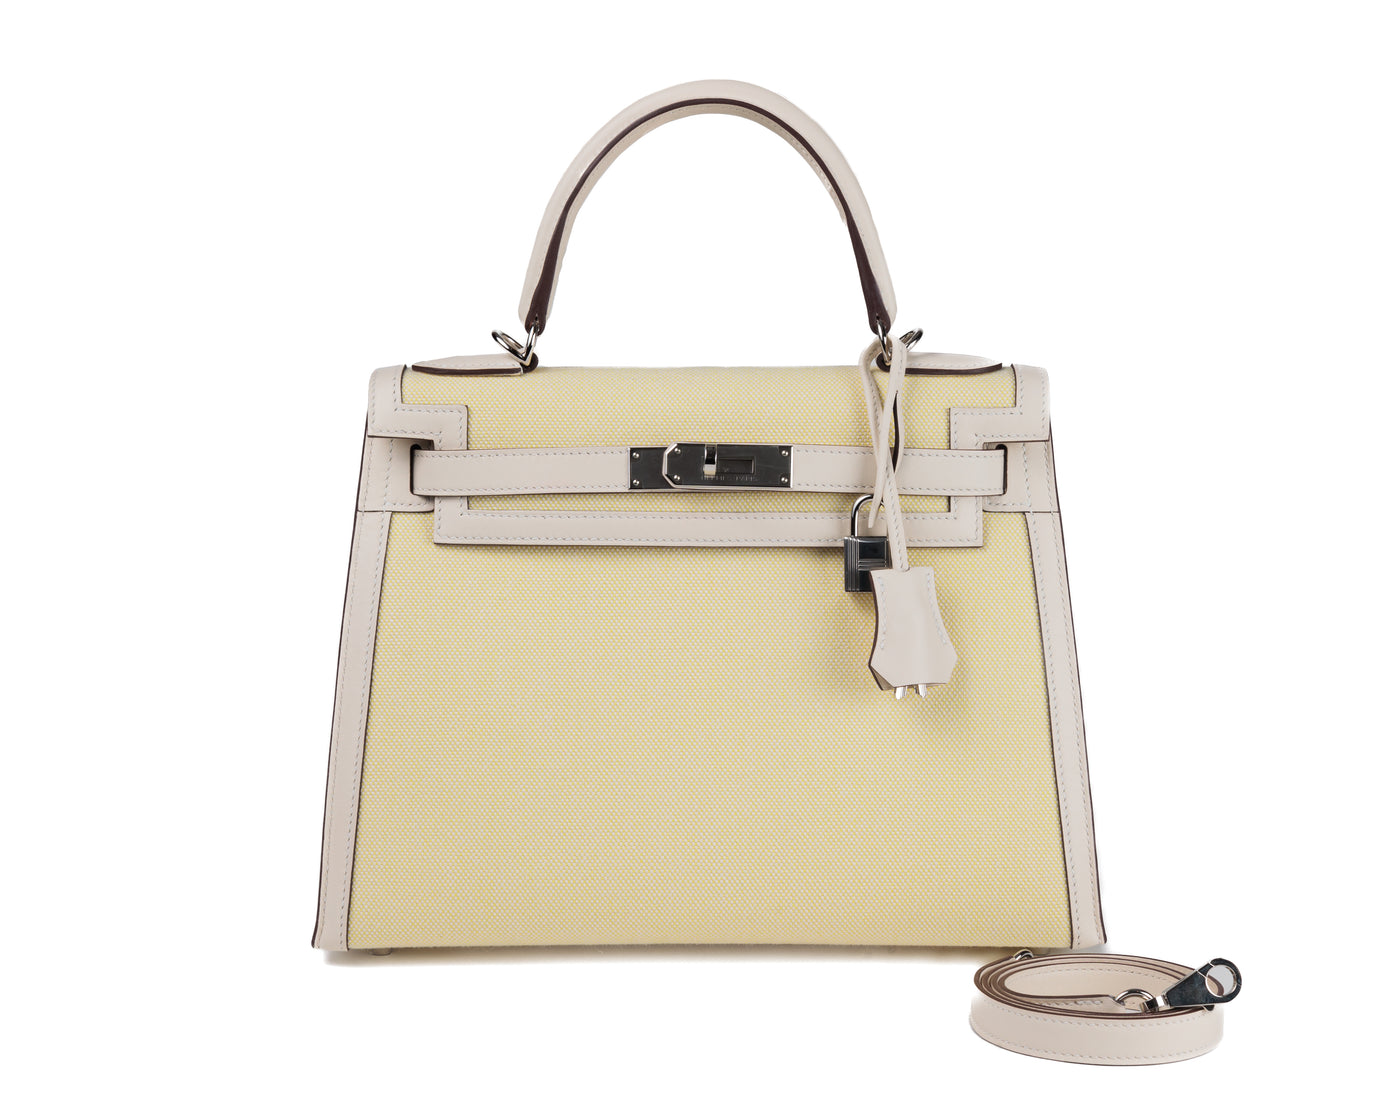 Hermès 28 cm Grey Swift and Pale Green Sellier Kelly with Palladium Hardware